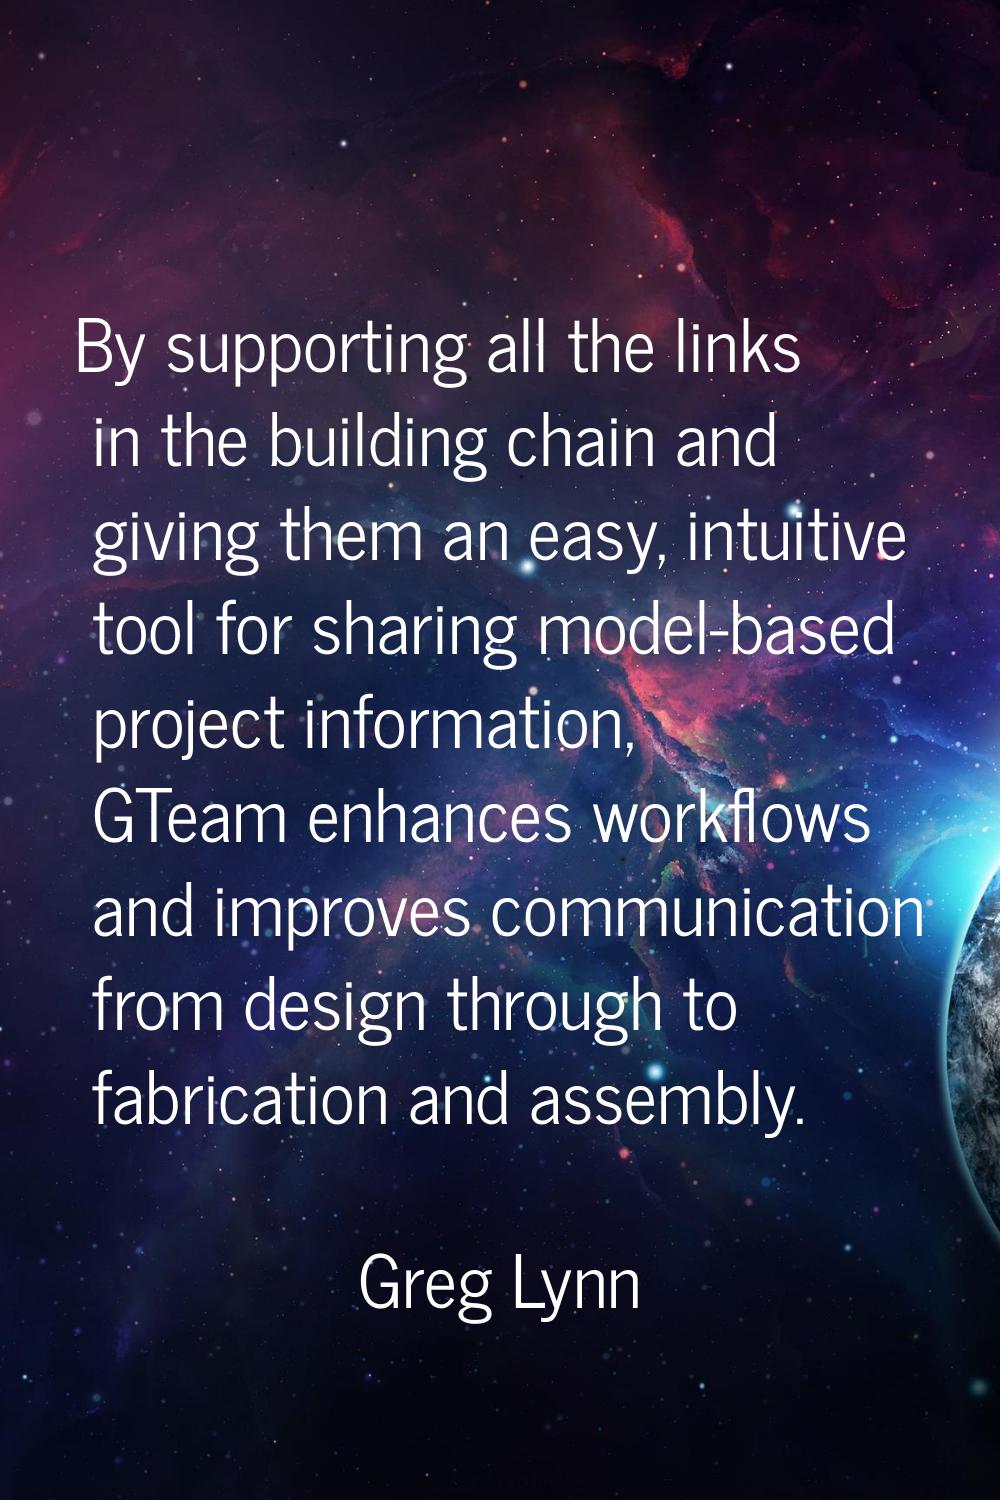 By supporting all the links in the building chain and giving them an easy, intuitive tool for shari